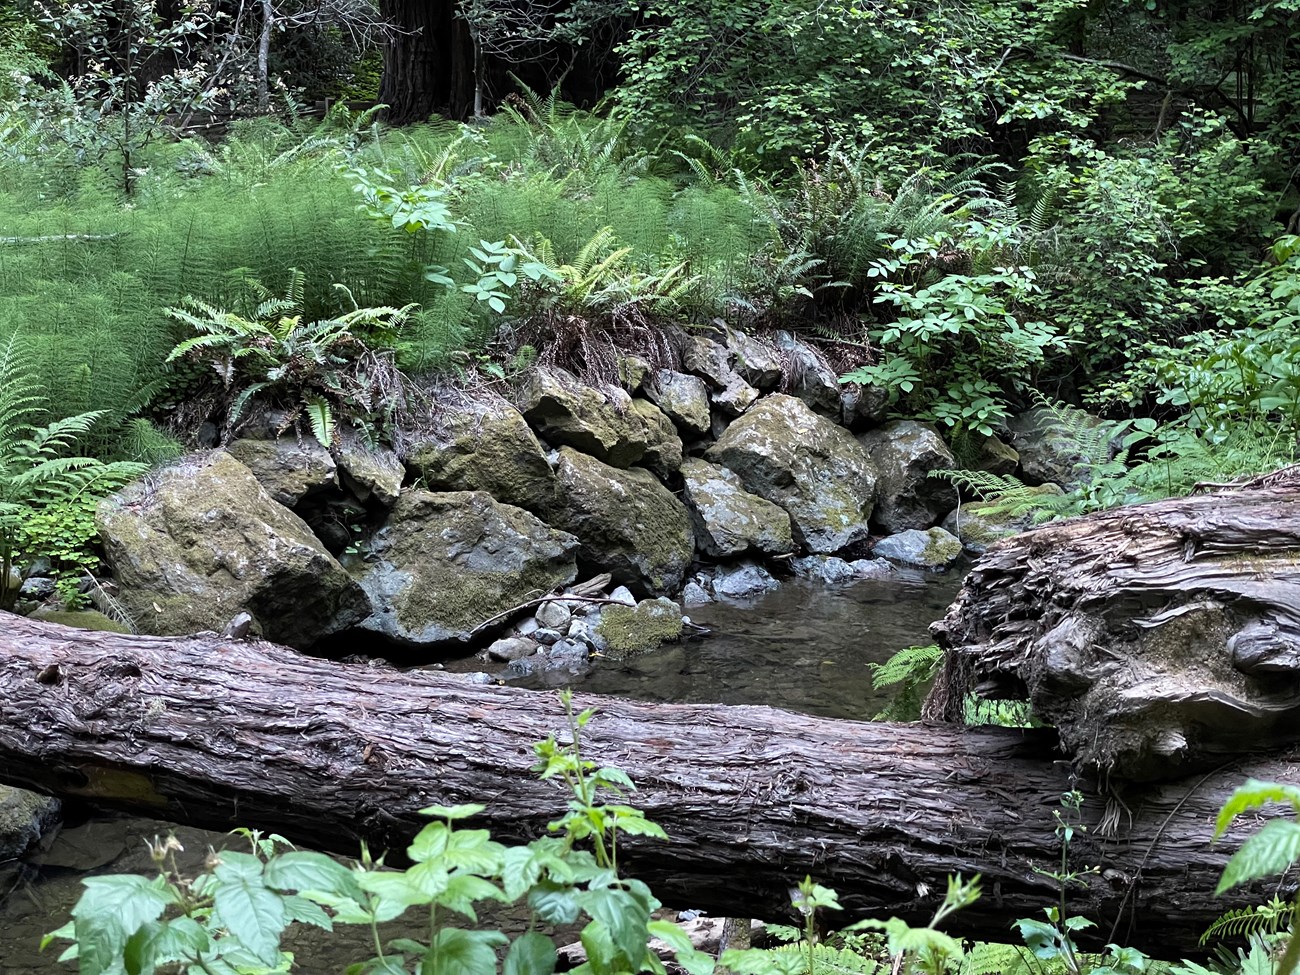 Large, engineered boulders built into a section of stream bank Riprap along the banks of Redwood Creek